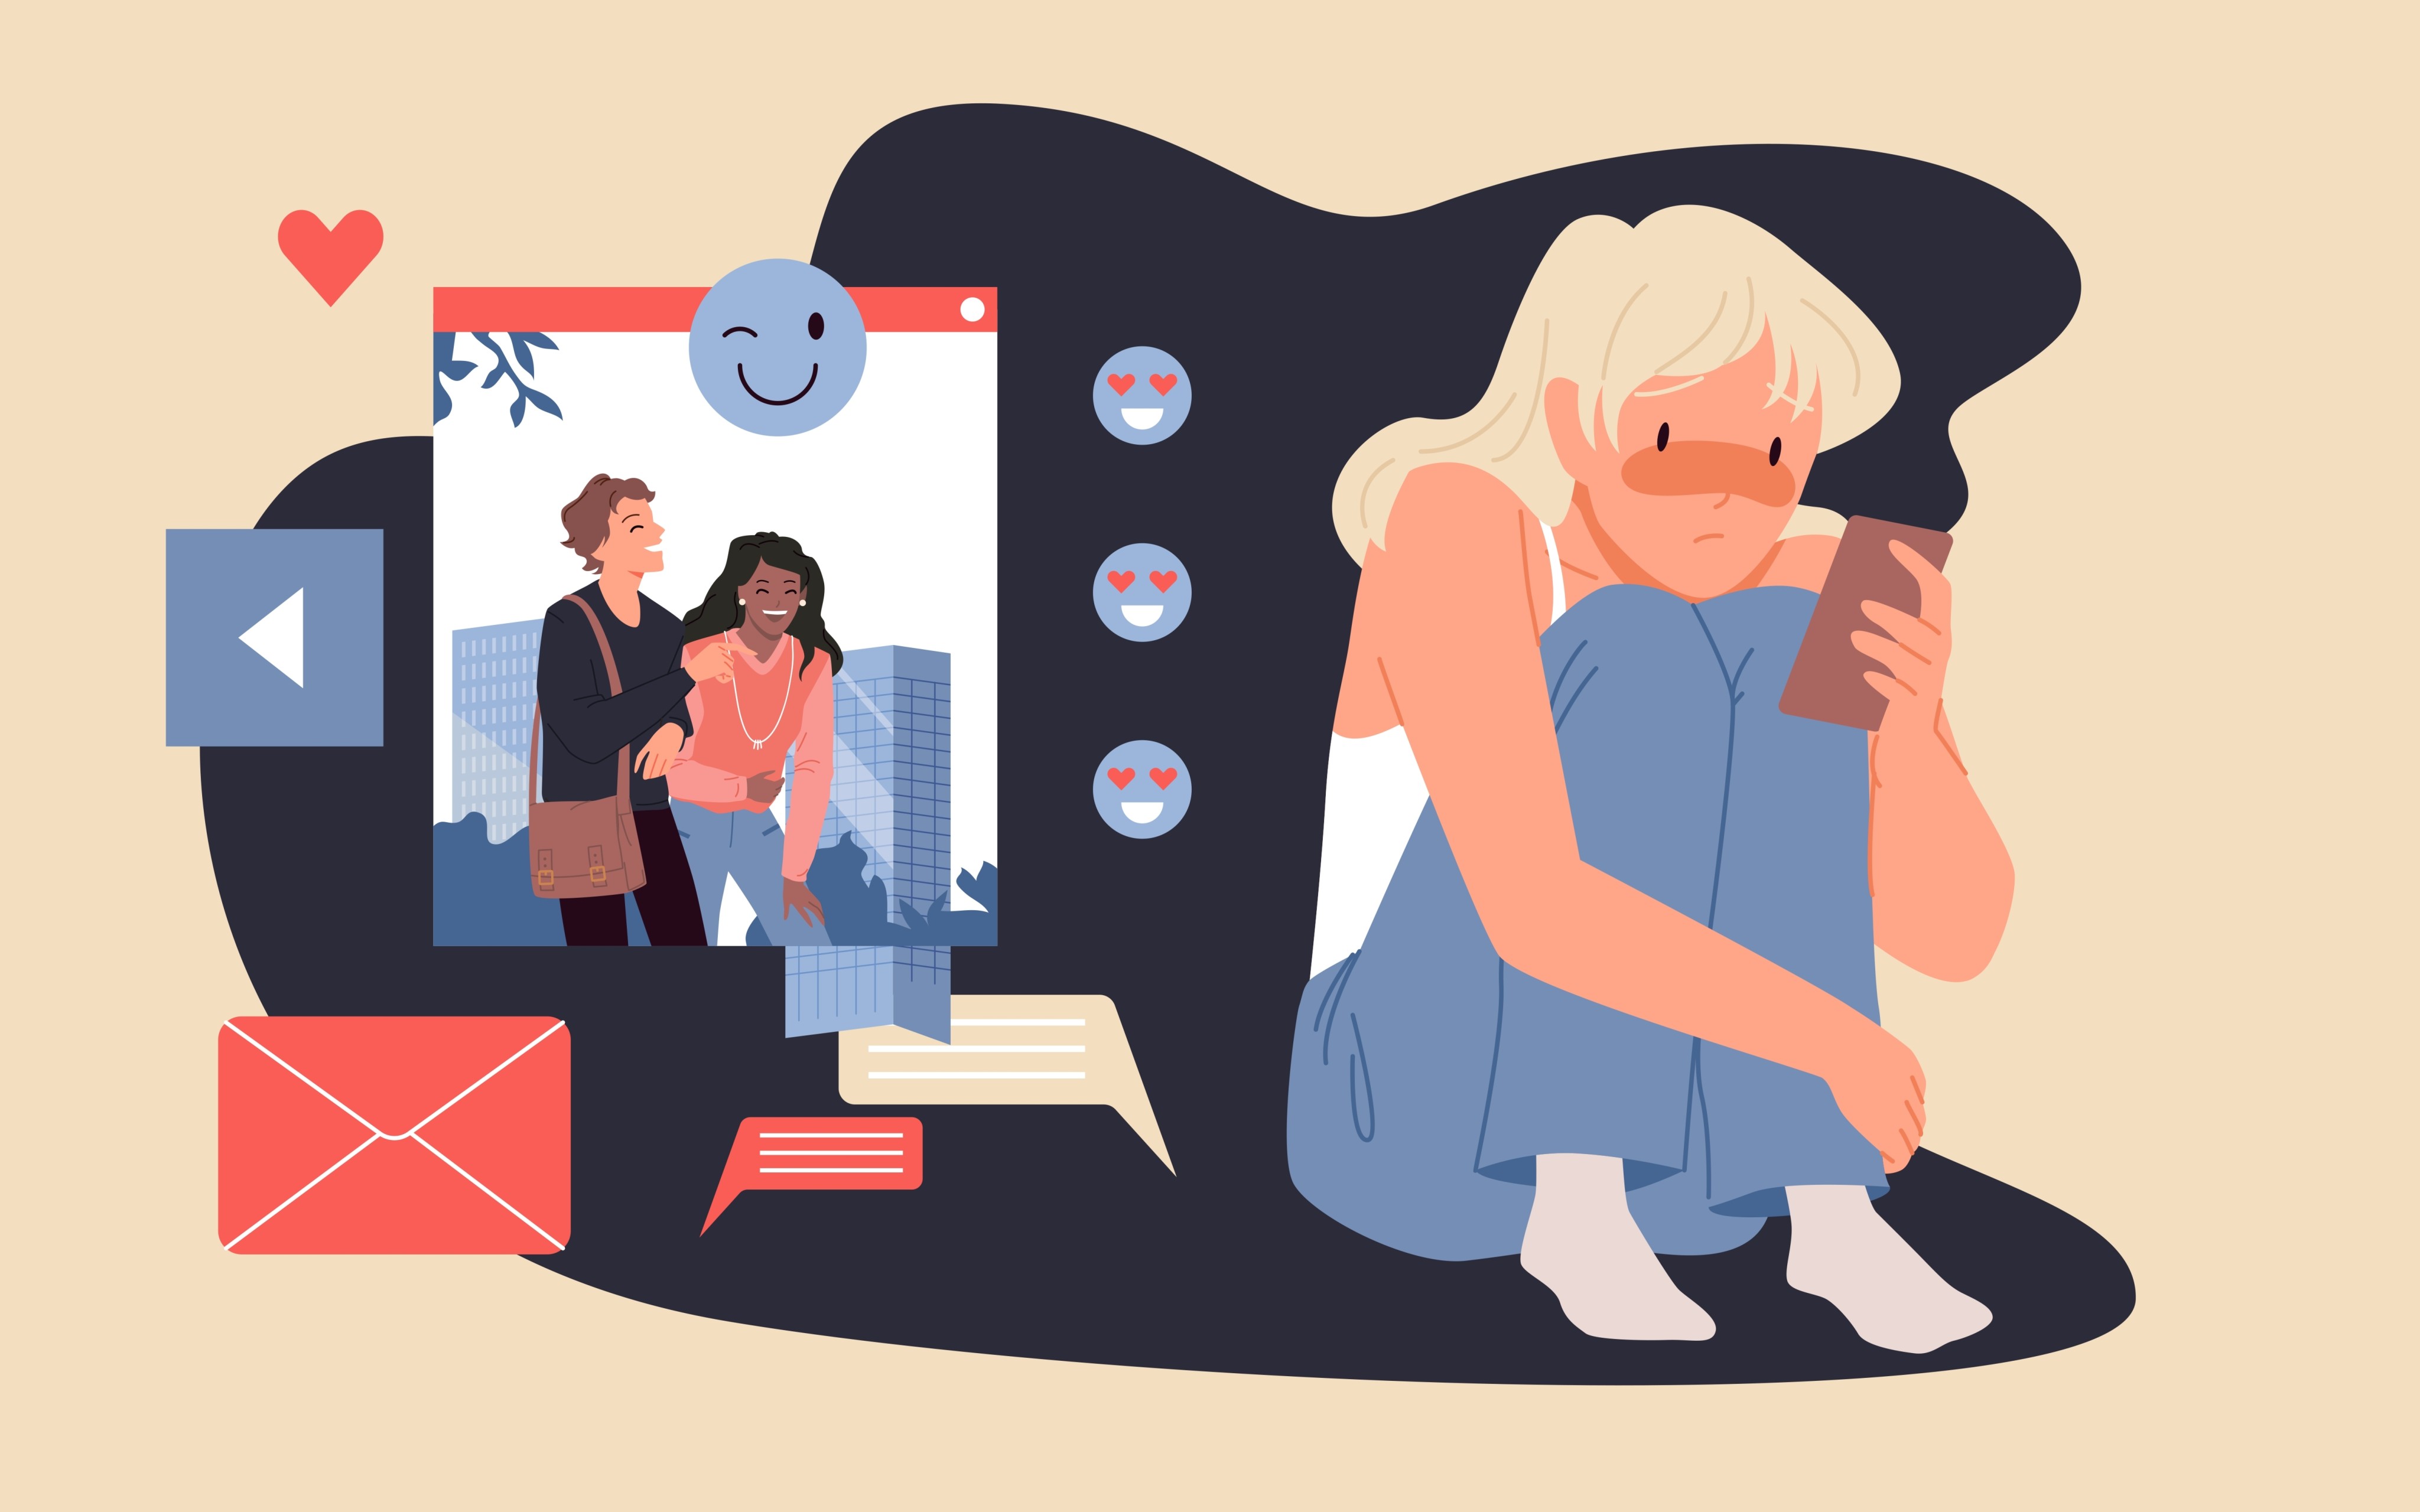 Have You Made Friends Online, But Not In Person?